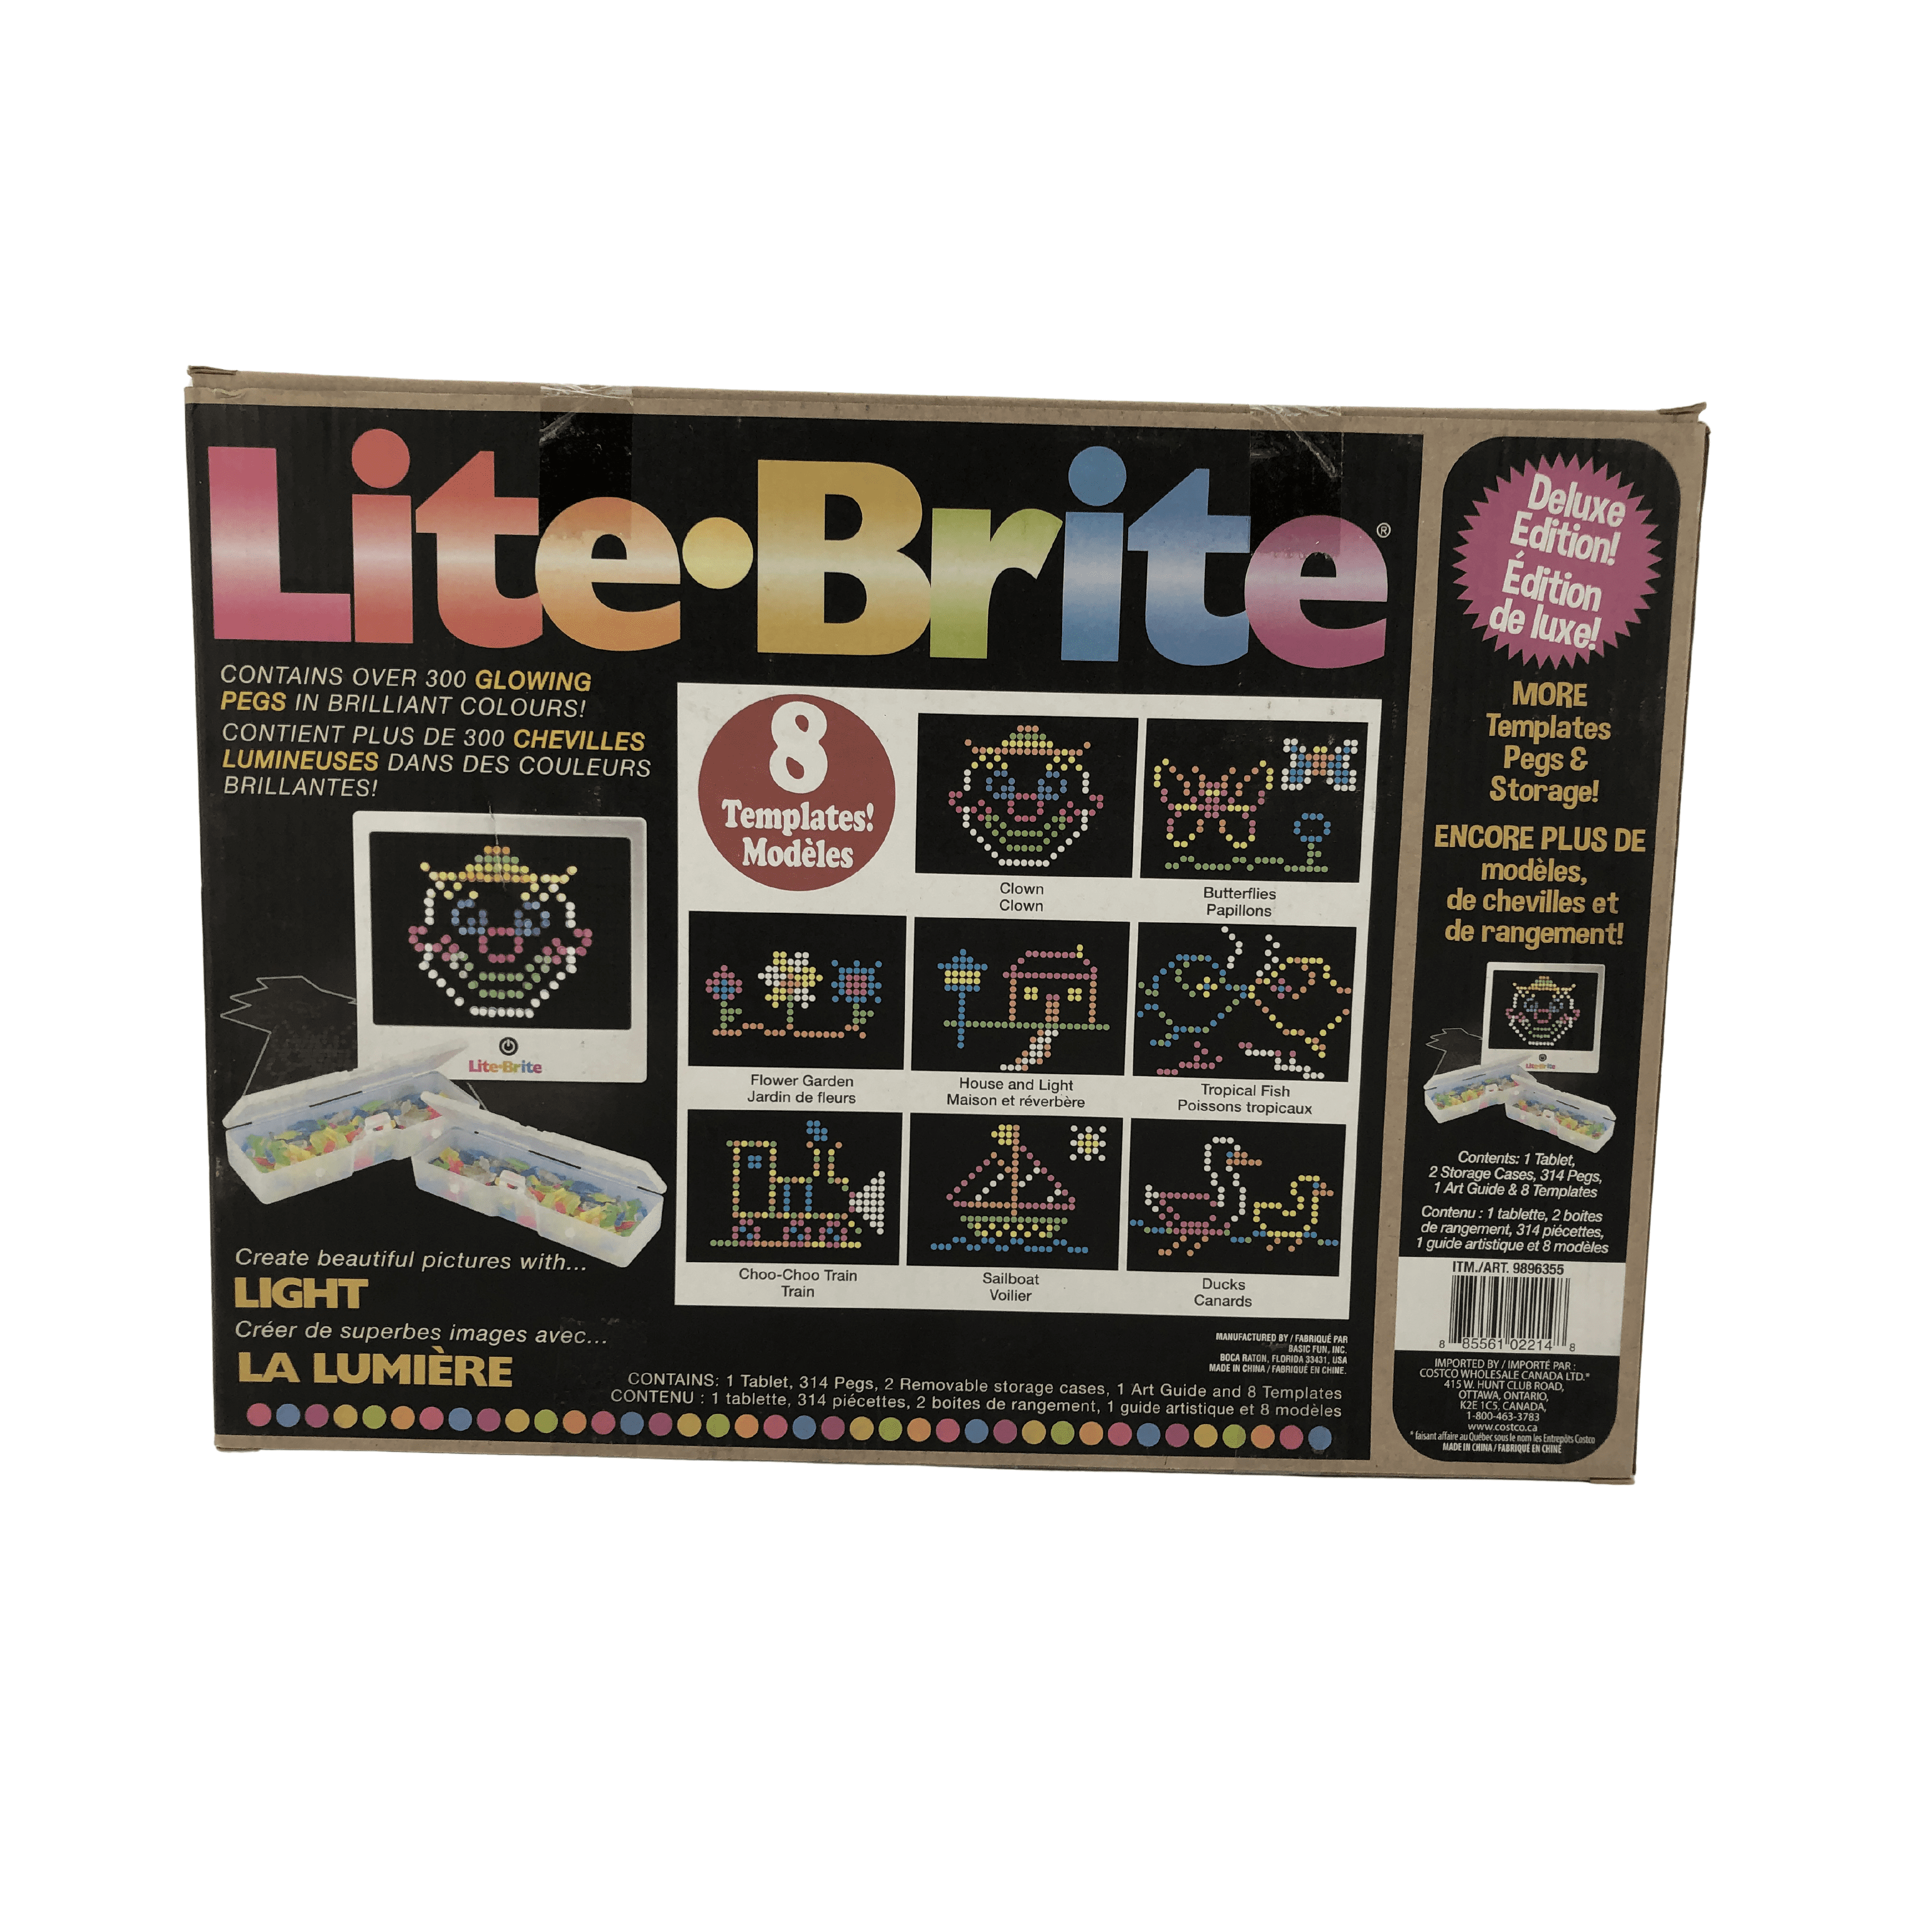 Lite brite 2019 Version with 326 peices and a tablet style board